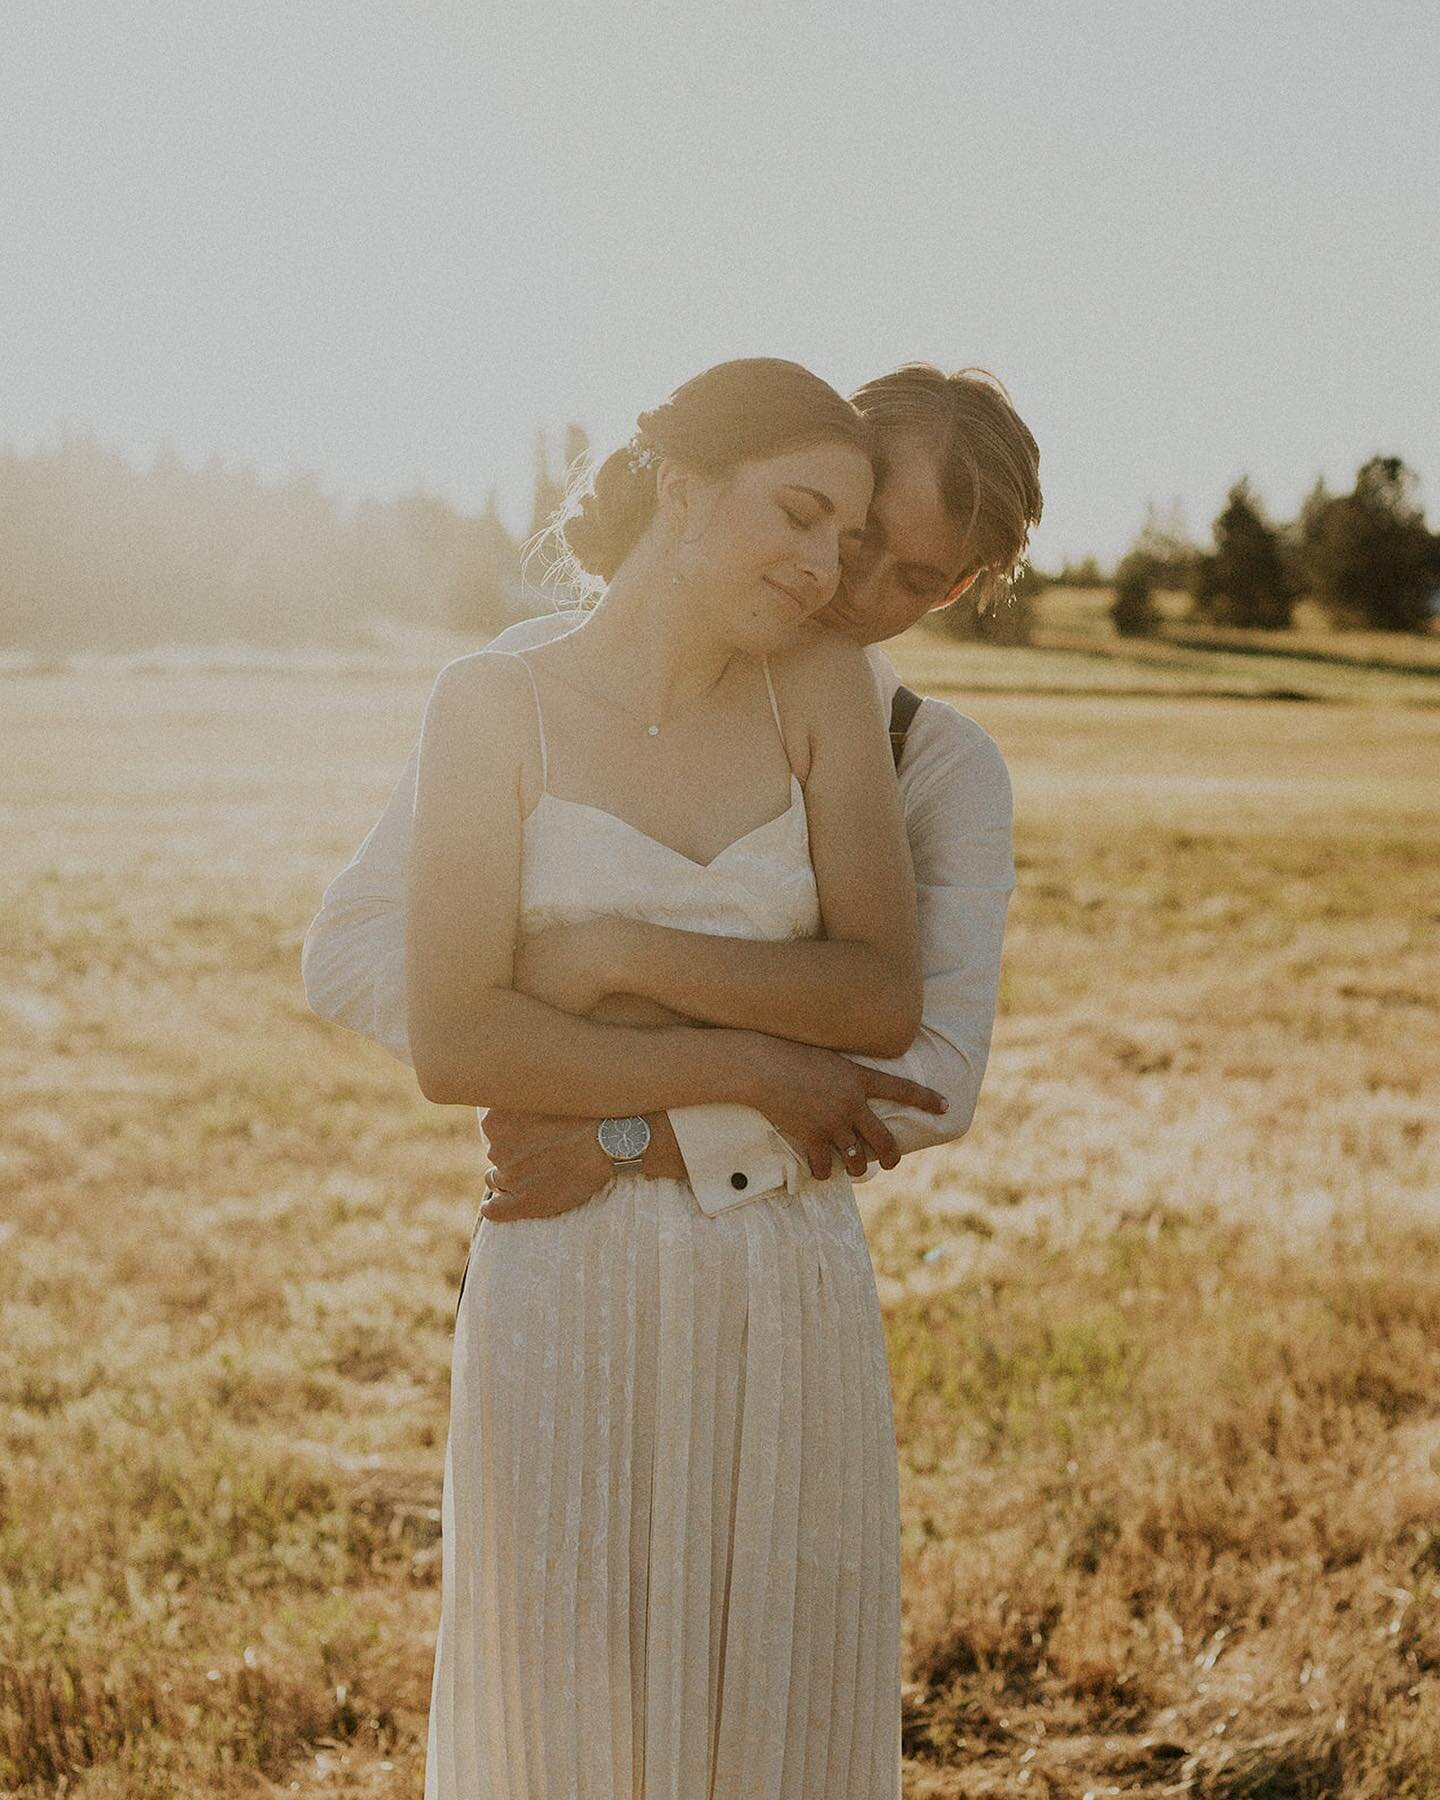 Sharing more from this golden wedding day in Spokane on my stories today!

Also another friendly reminder to reach out for 2023 weddings/elopements soon!